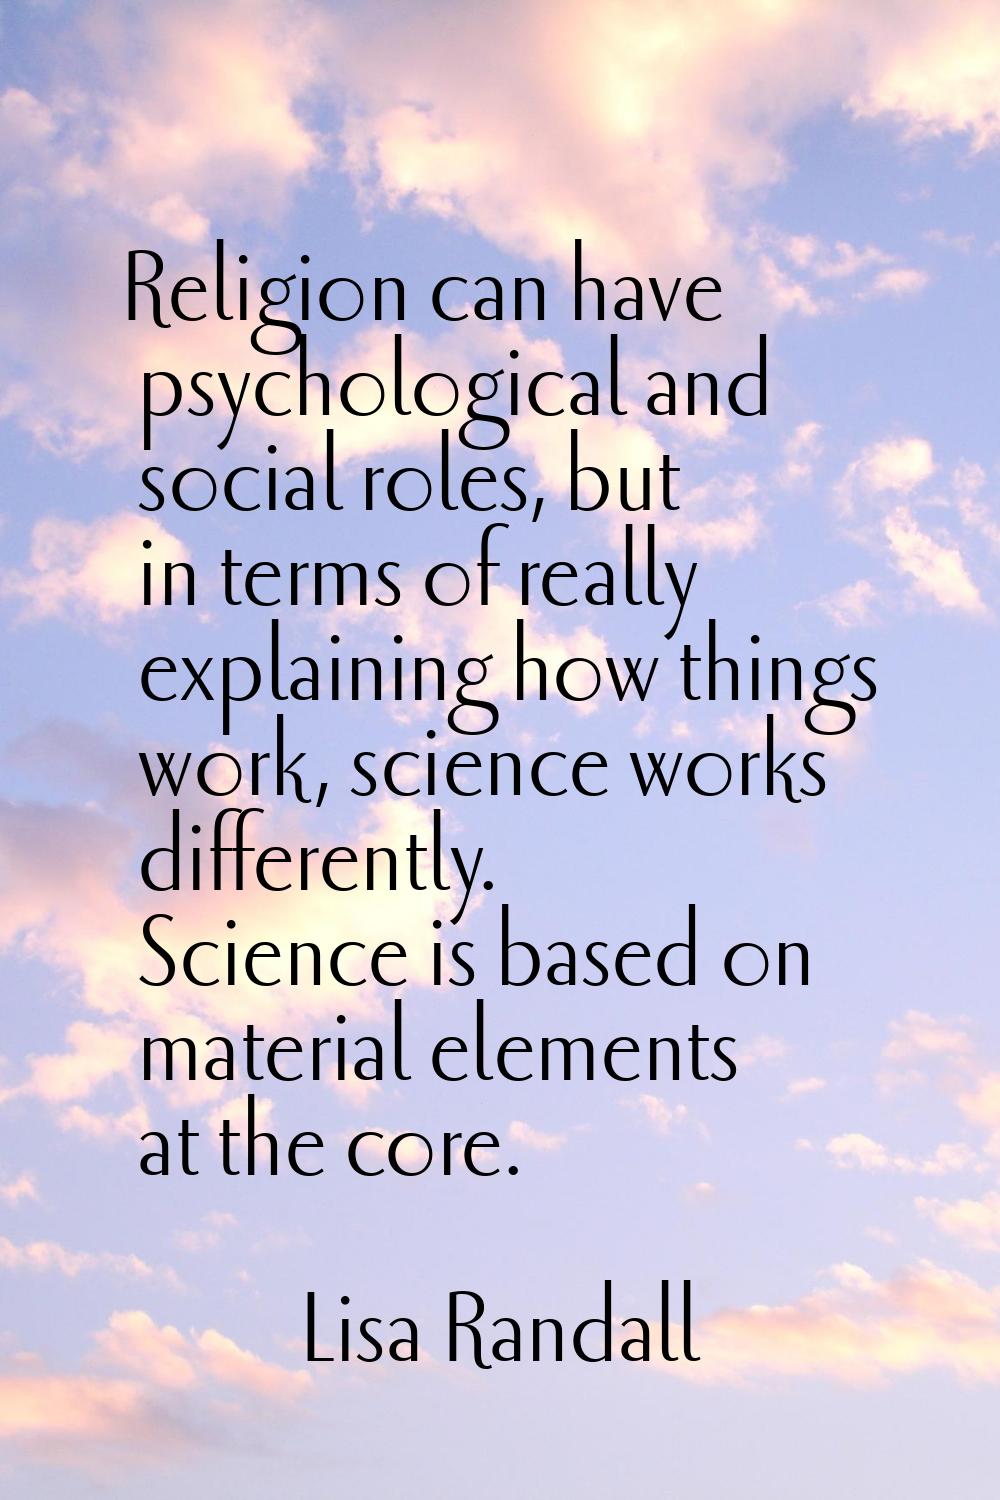 Religion can have psychological and social roles, but in terms of really explaining how things work